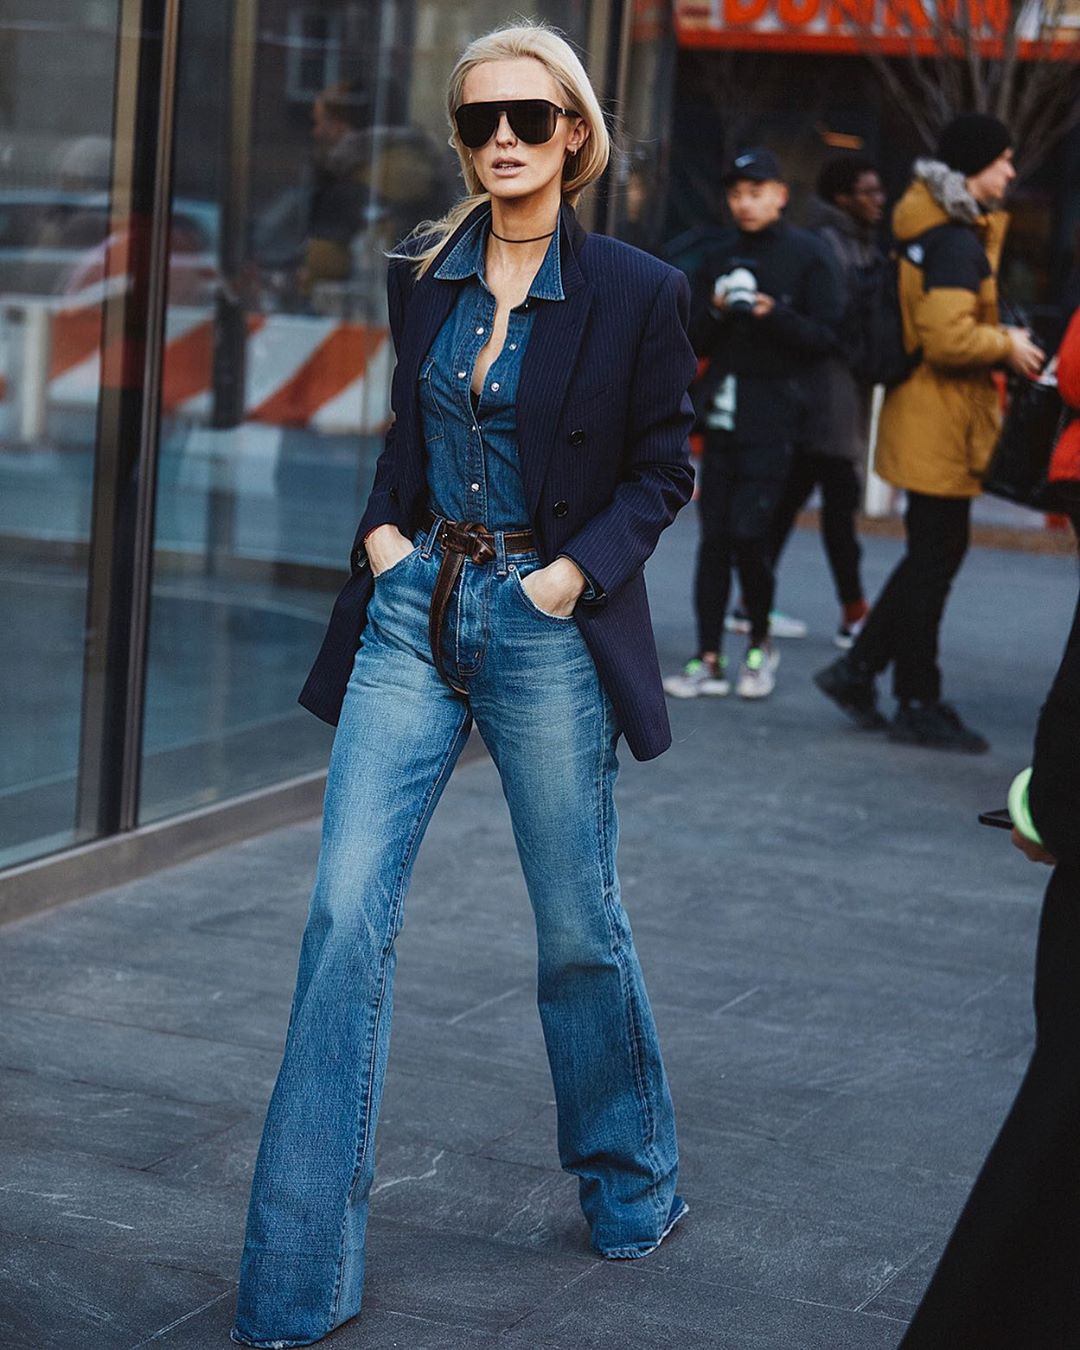 This Double Denim Look is So Good